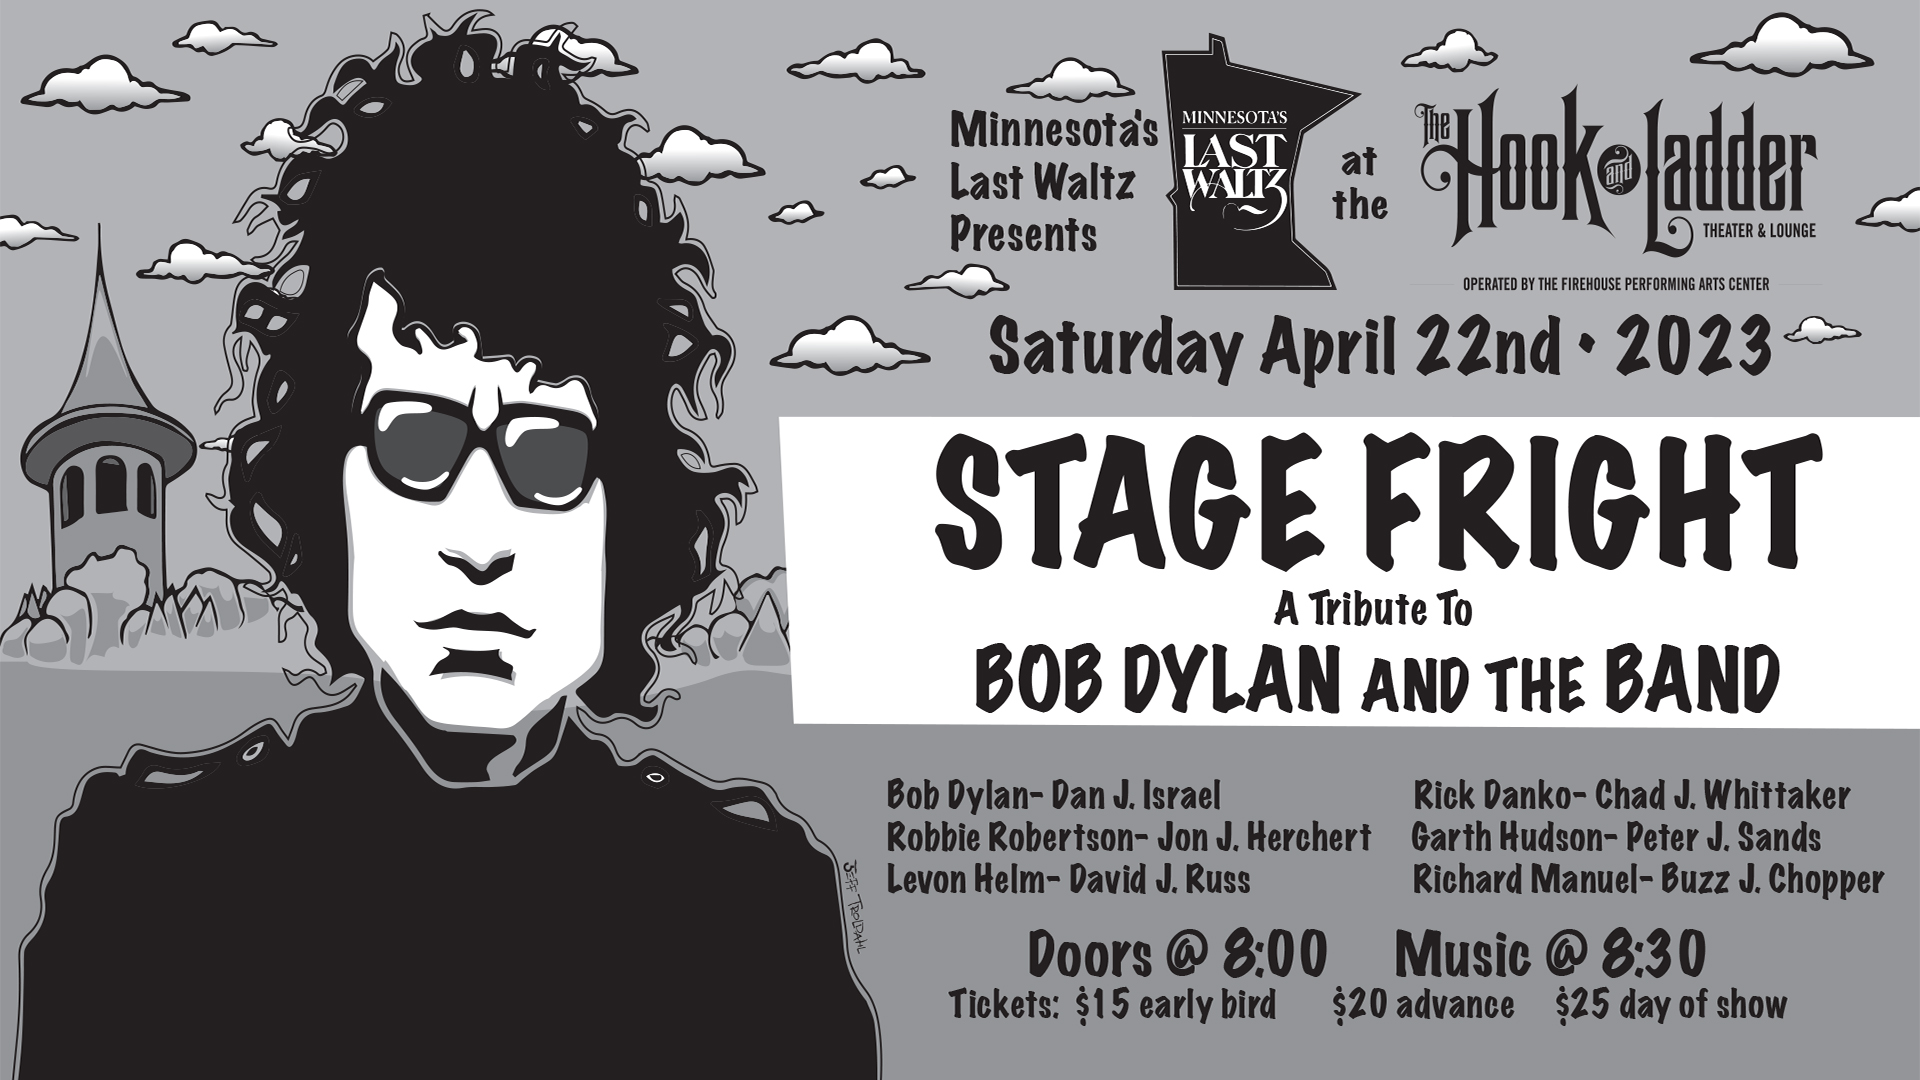 Minnesota's Last Waltz Presents Stage Fright A Tribute To Bob Dylan & The Band Saturday, April 22 The Hook and Ladder Theater Doors 8:00pm :: Music 8:30pm :: 21+ General Admission*: $15 Early / $20 Advance / $25 Day of Show *Does not include fees NO REFUNDS